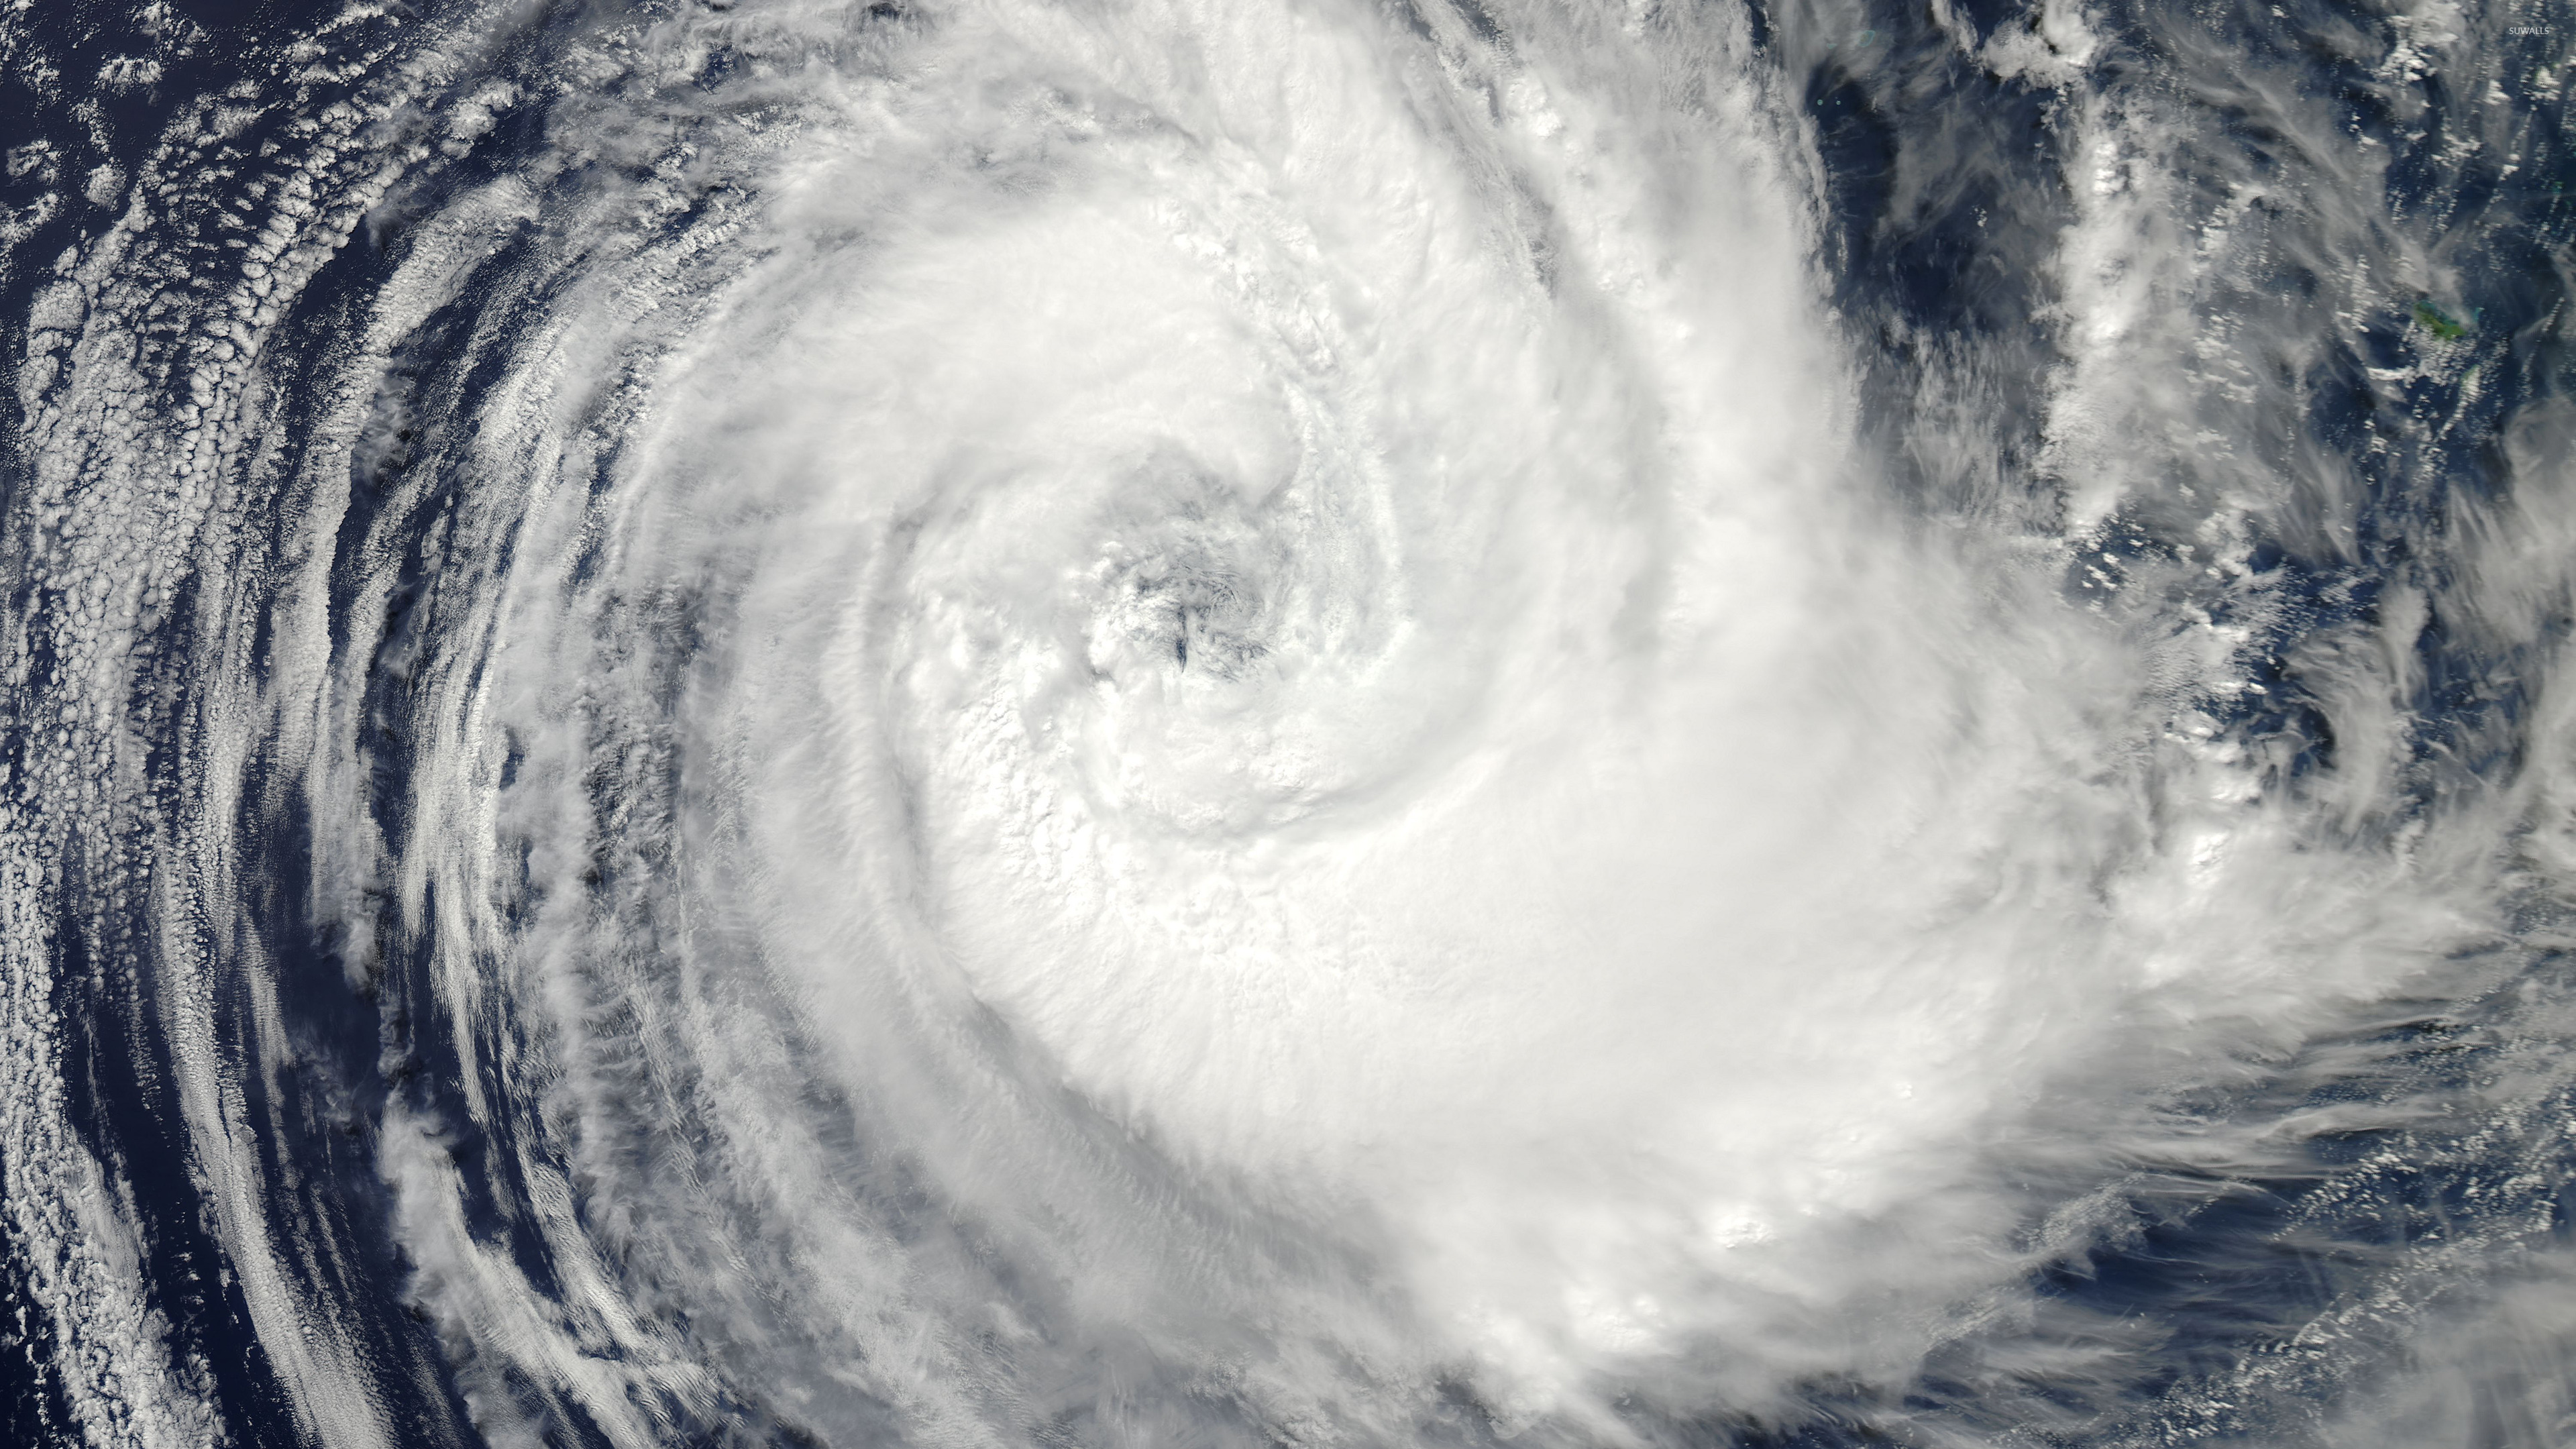 File:Cyclone Catarina from the ISS on March 26 2004.JPG - Wikipedia